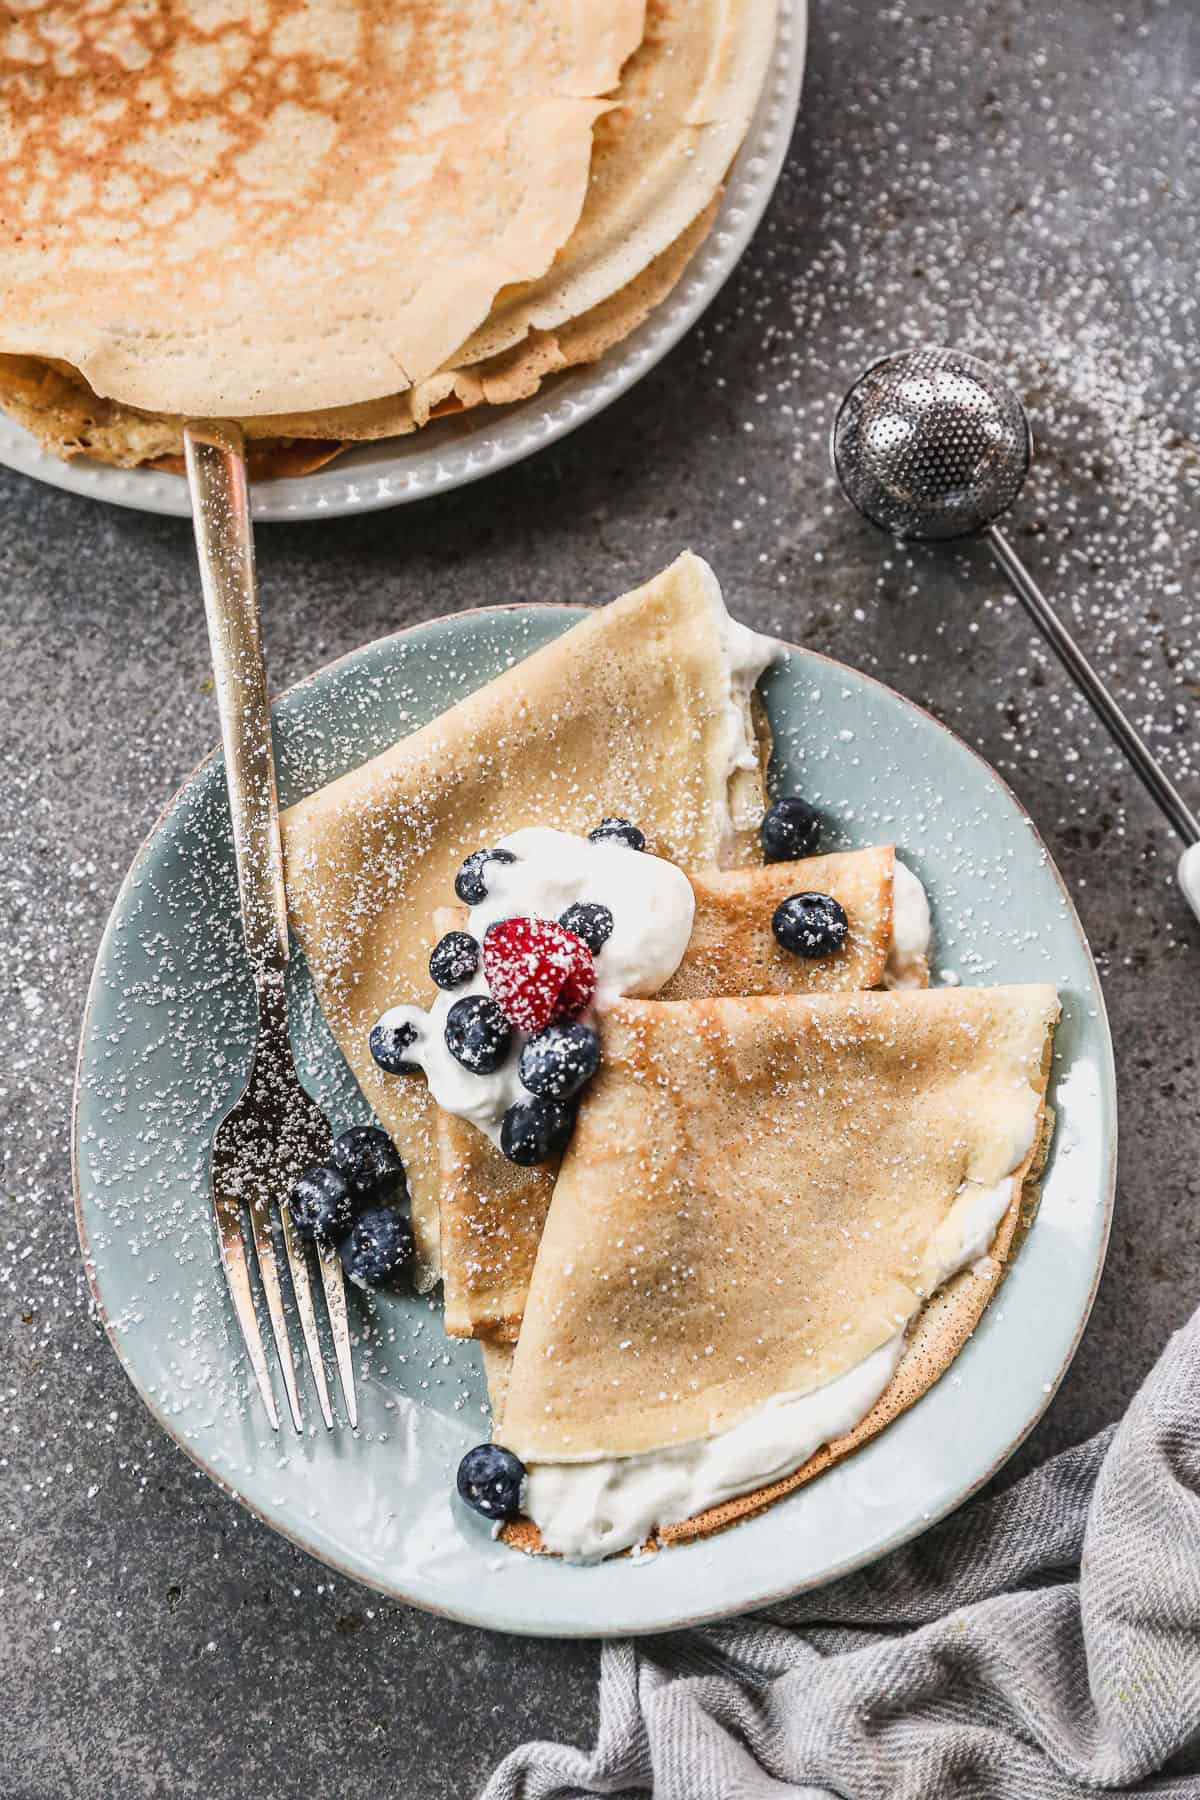 A plate with three French crepes on it, folded into a triangle and served with whipped cream and fresh berries.